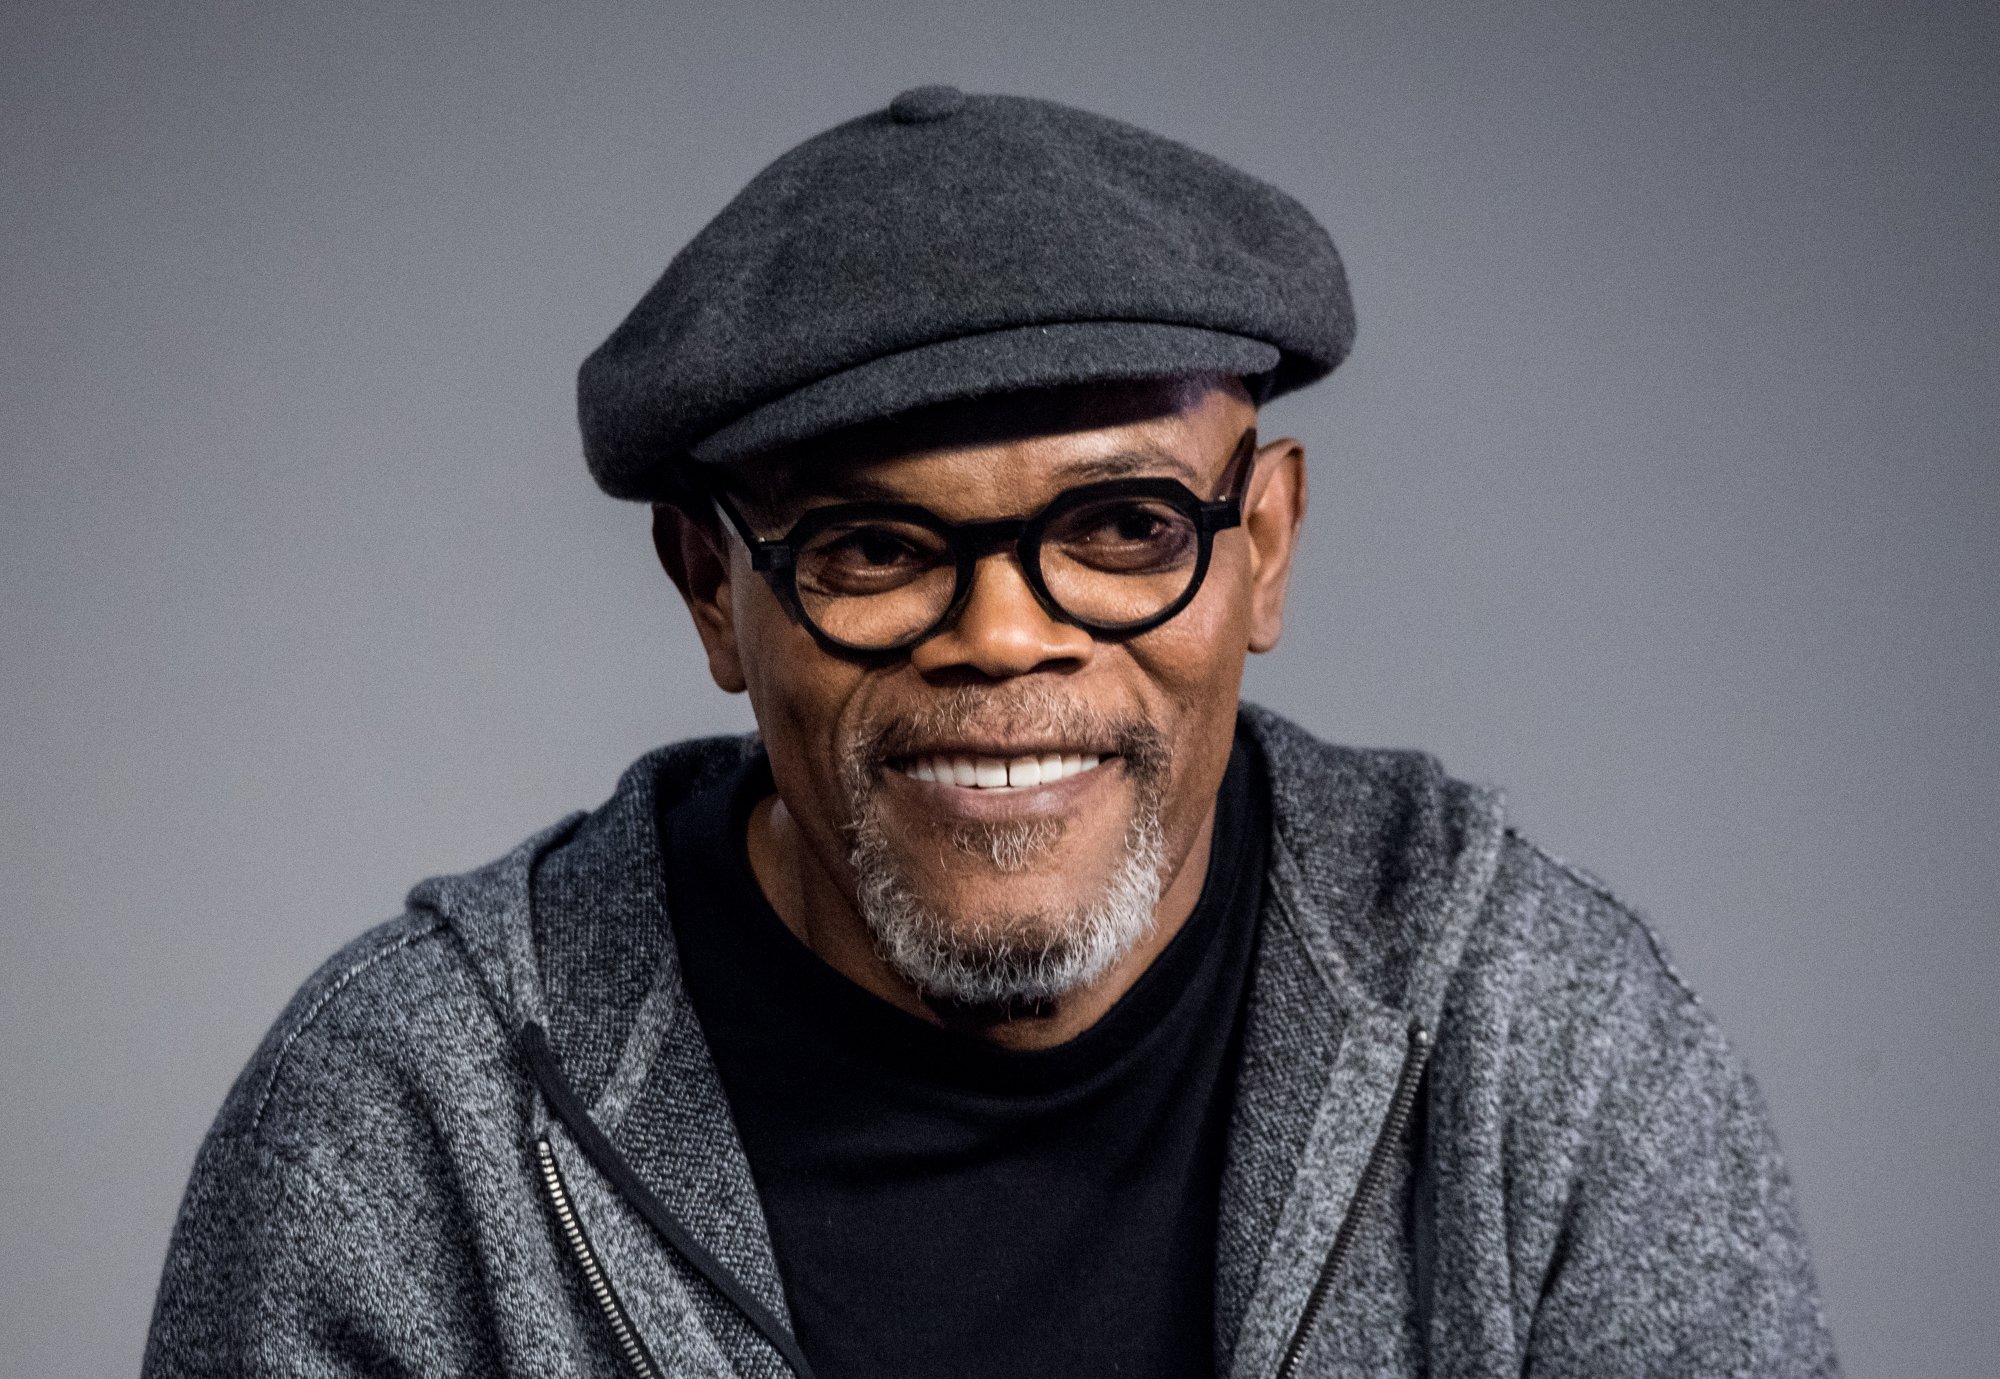 'Pulp Fiction' actor Samuel L. Jackson wearing a hat and a hoodie